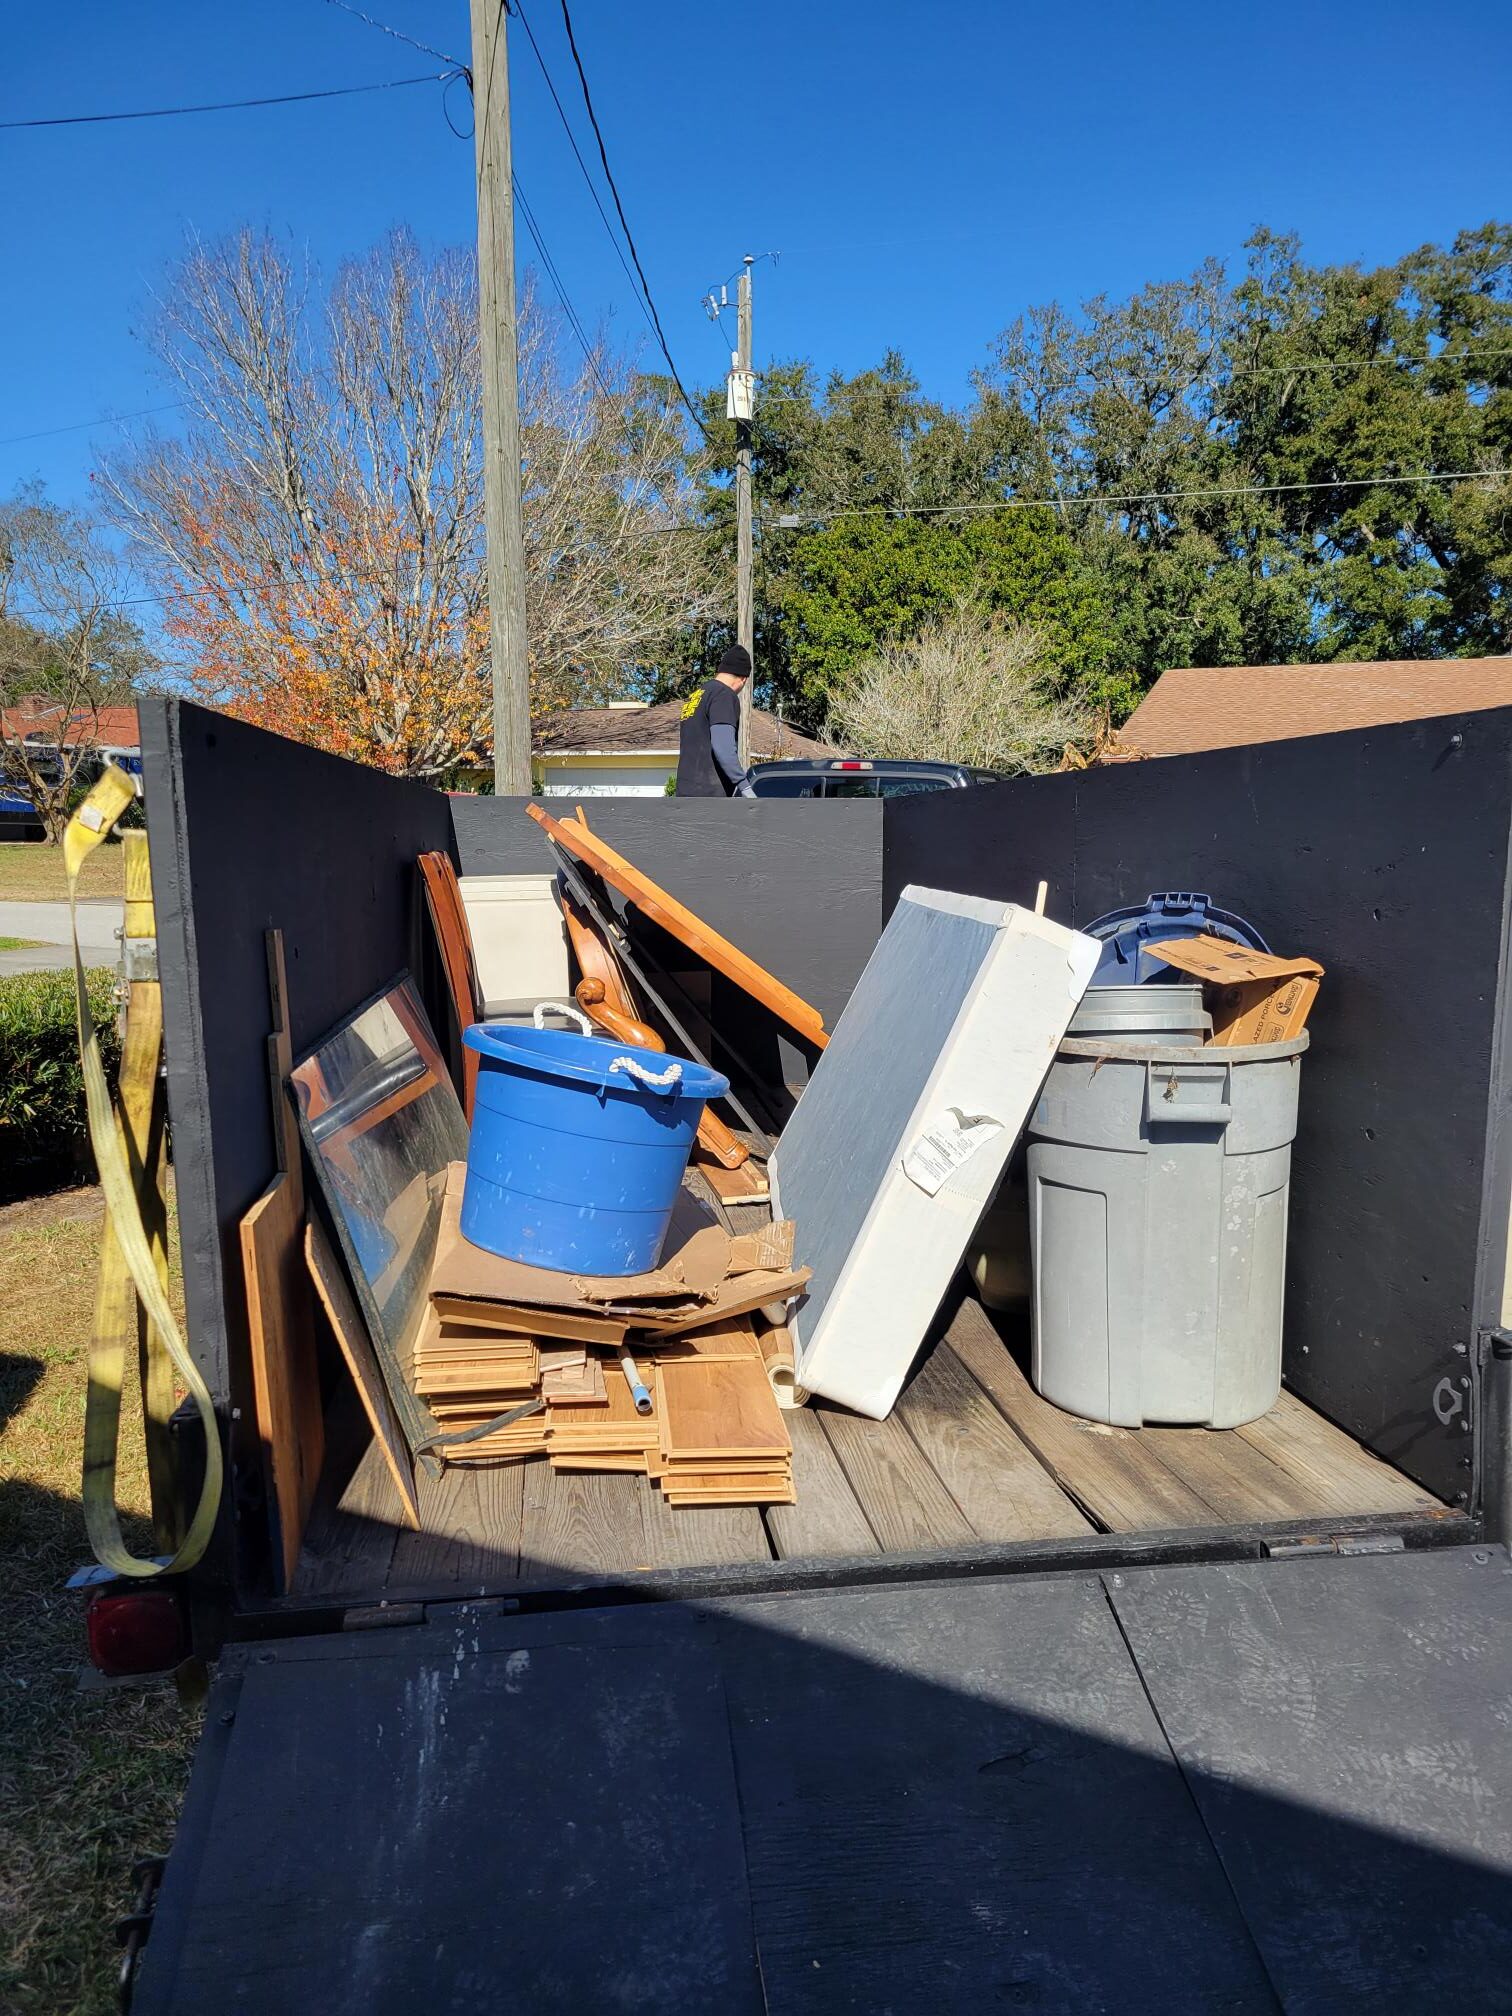 Shed cleanout, no job is too small!